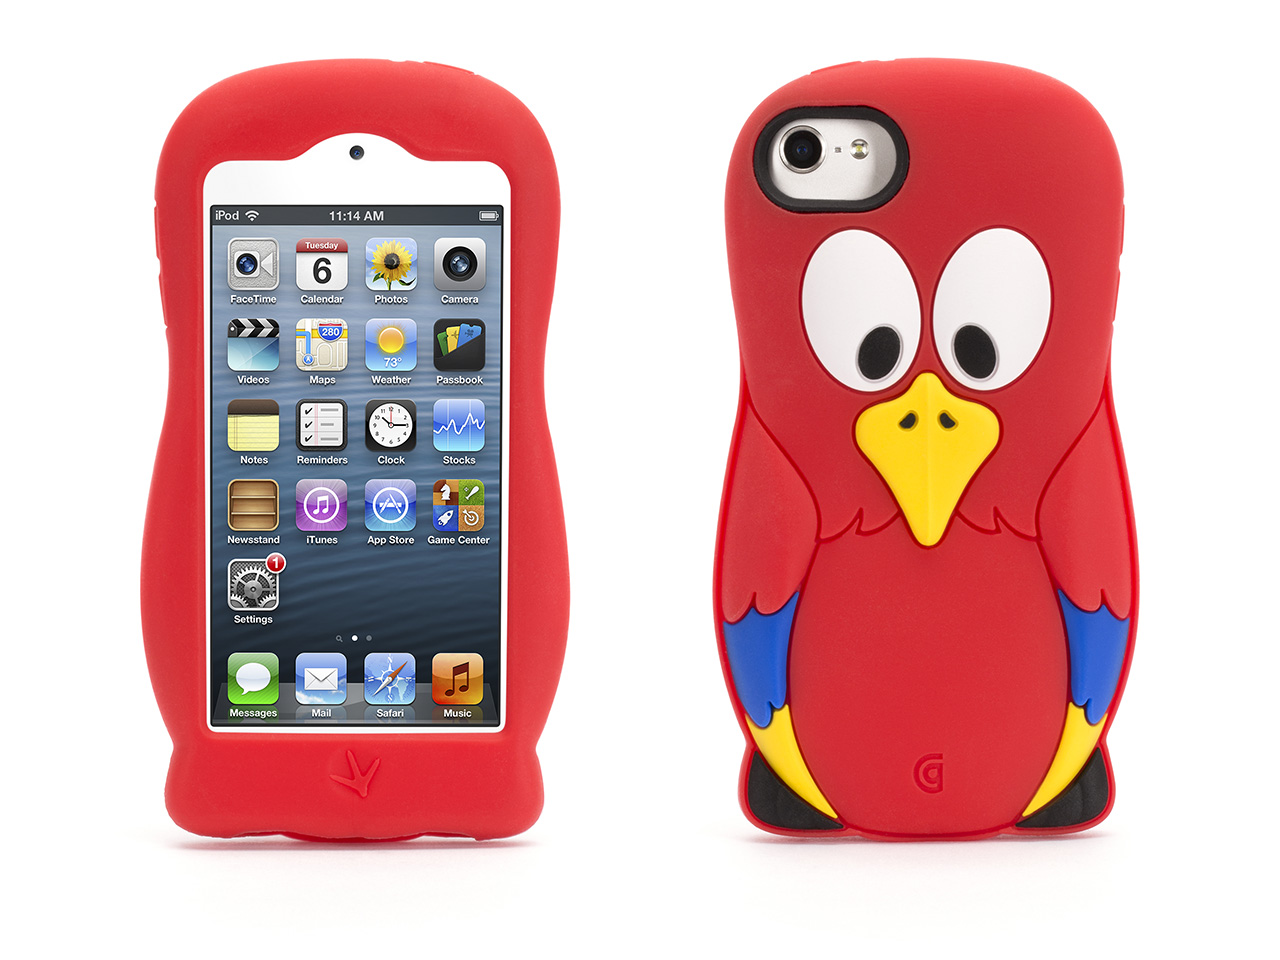 ipod touch cases